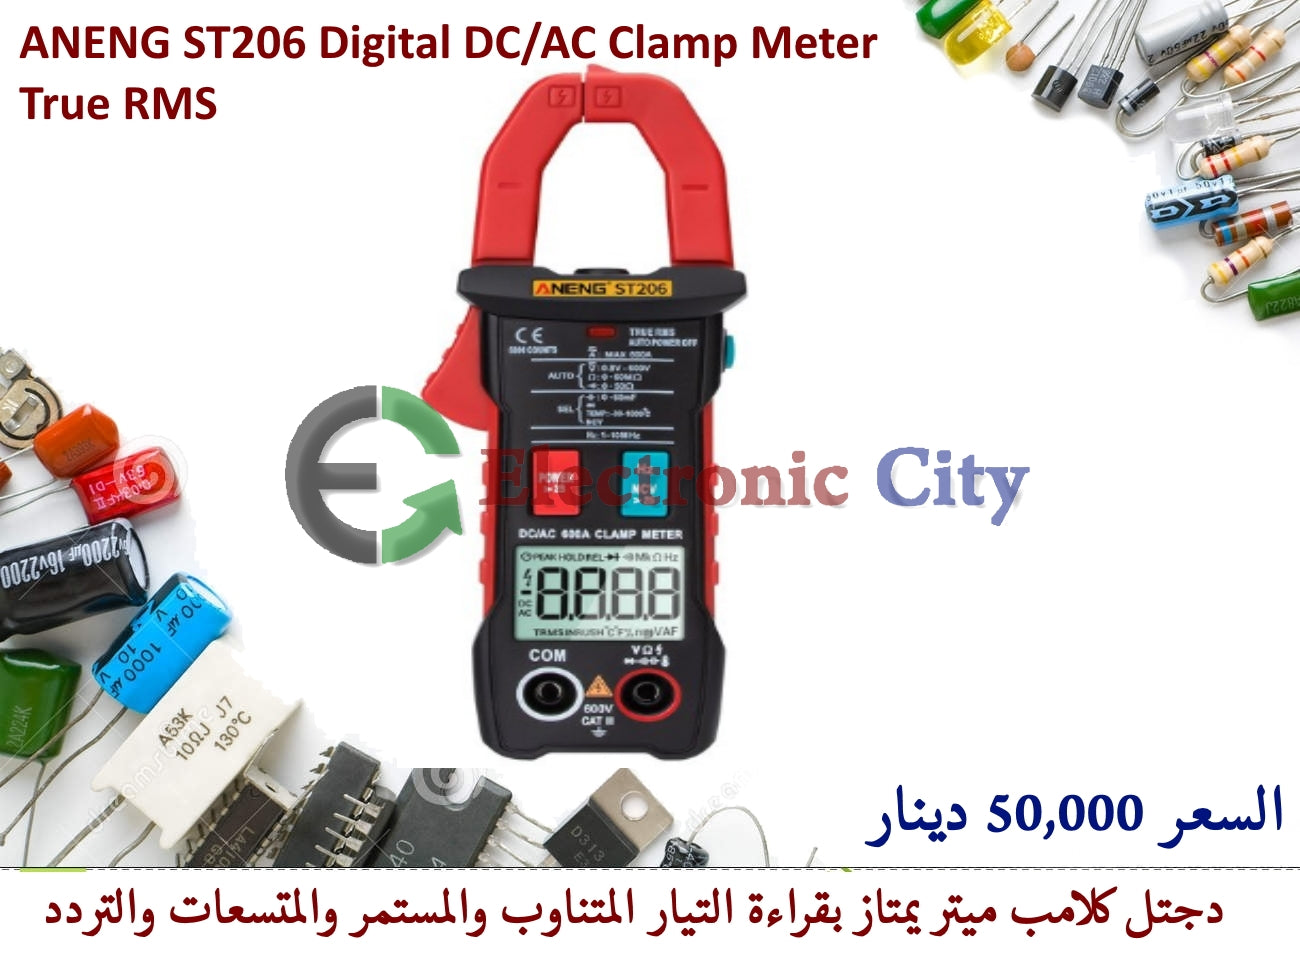 ANENG ST206 Digital DC/AC Current Clamp Meter True RMS